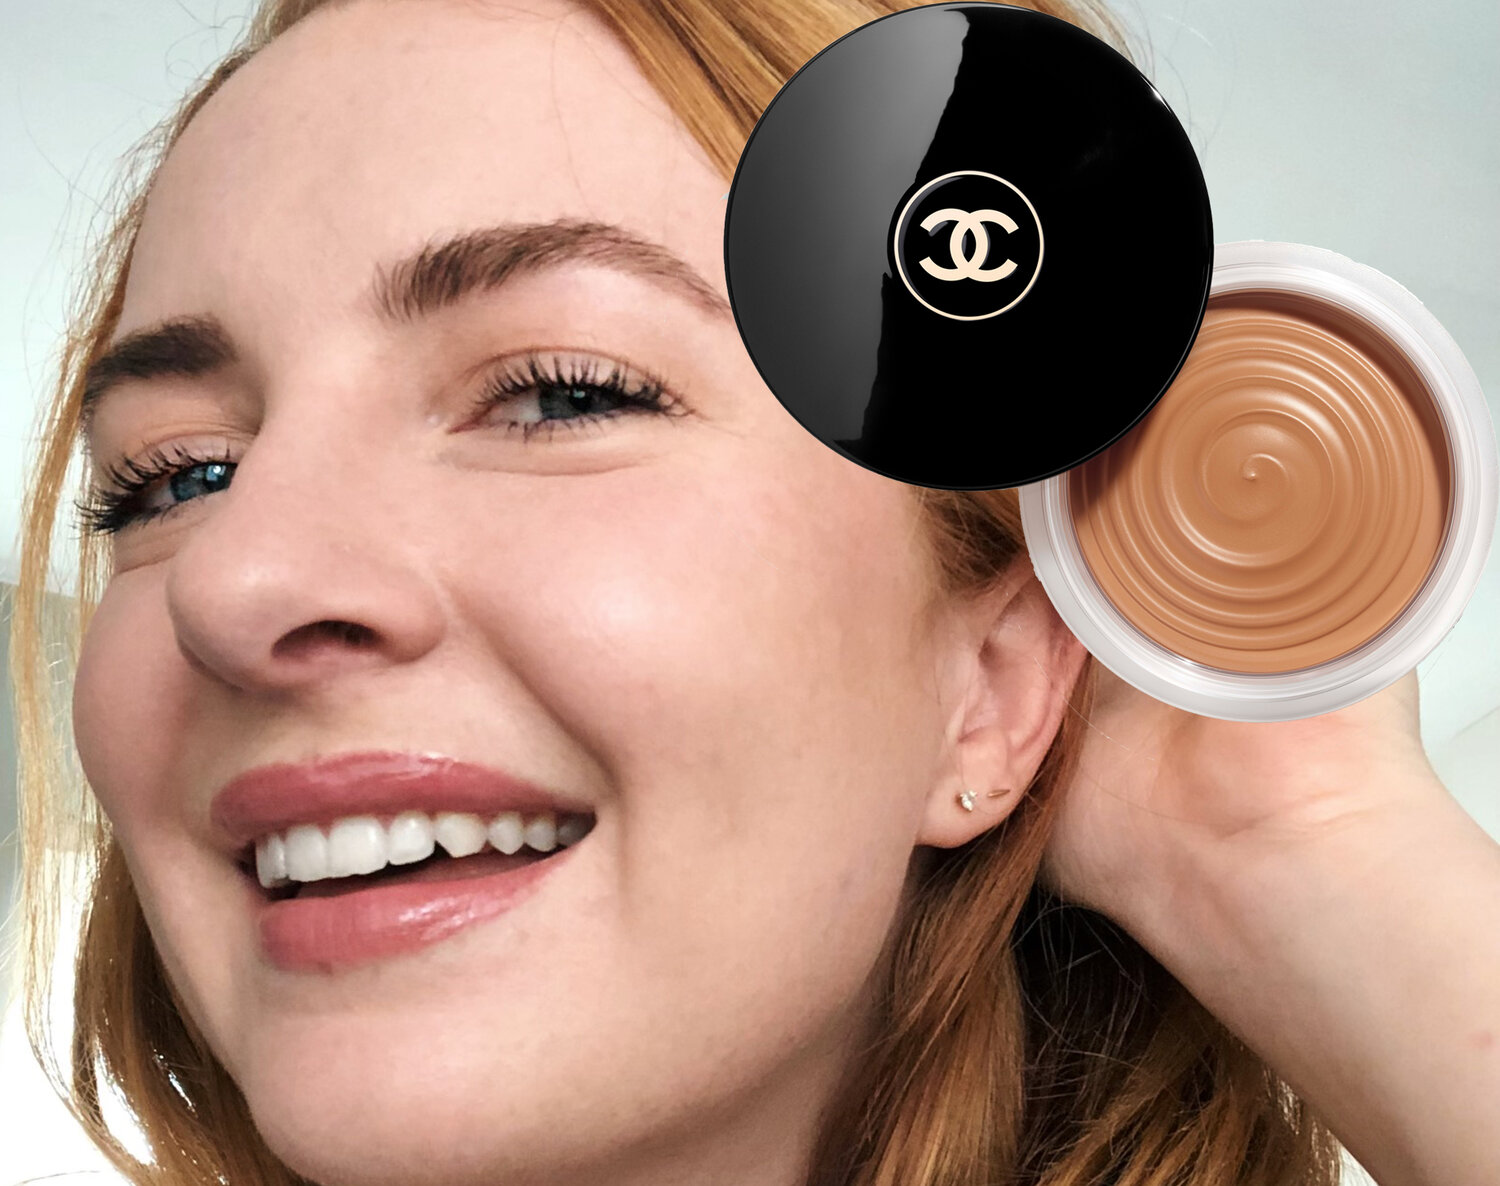 Chanel Original Soleil Tan de Chanel Bronzing Makeup Base - «☆ Soleil Tan  de Chanel Bronzing Makeup Base ☆ It's a sun kiss ☆ Impressions of use ☆  Photos of the packaging